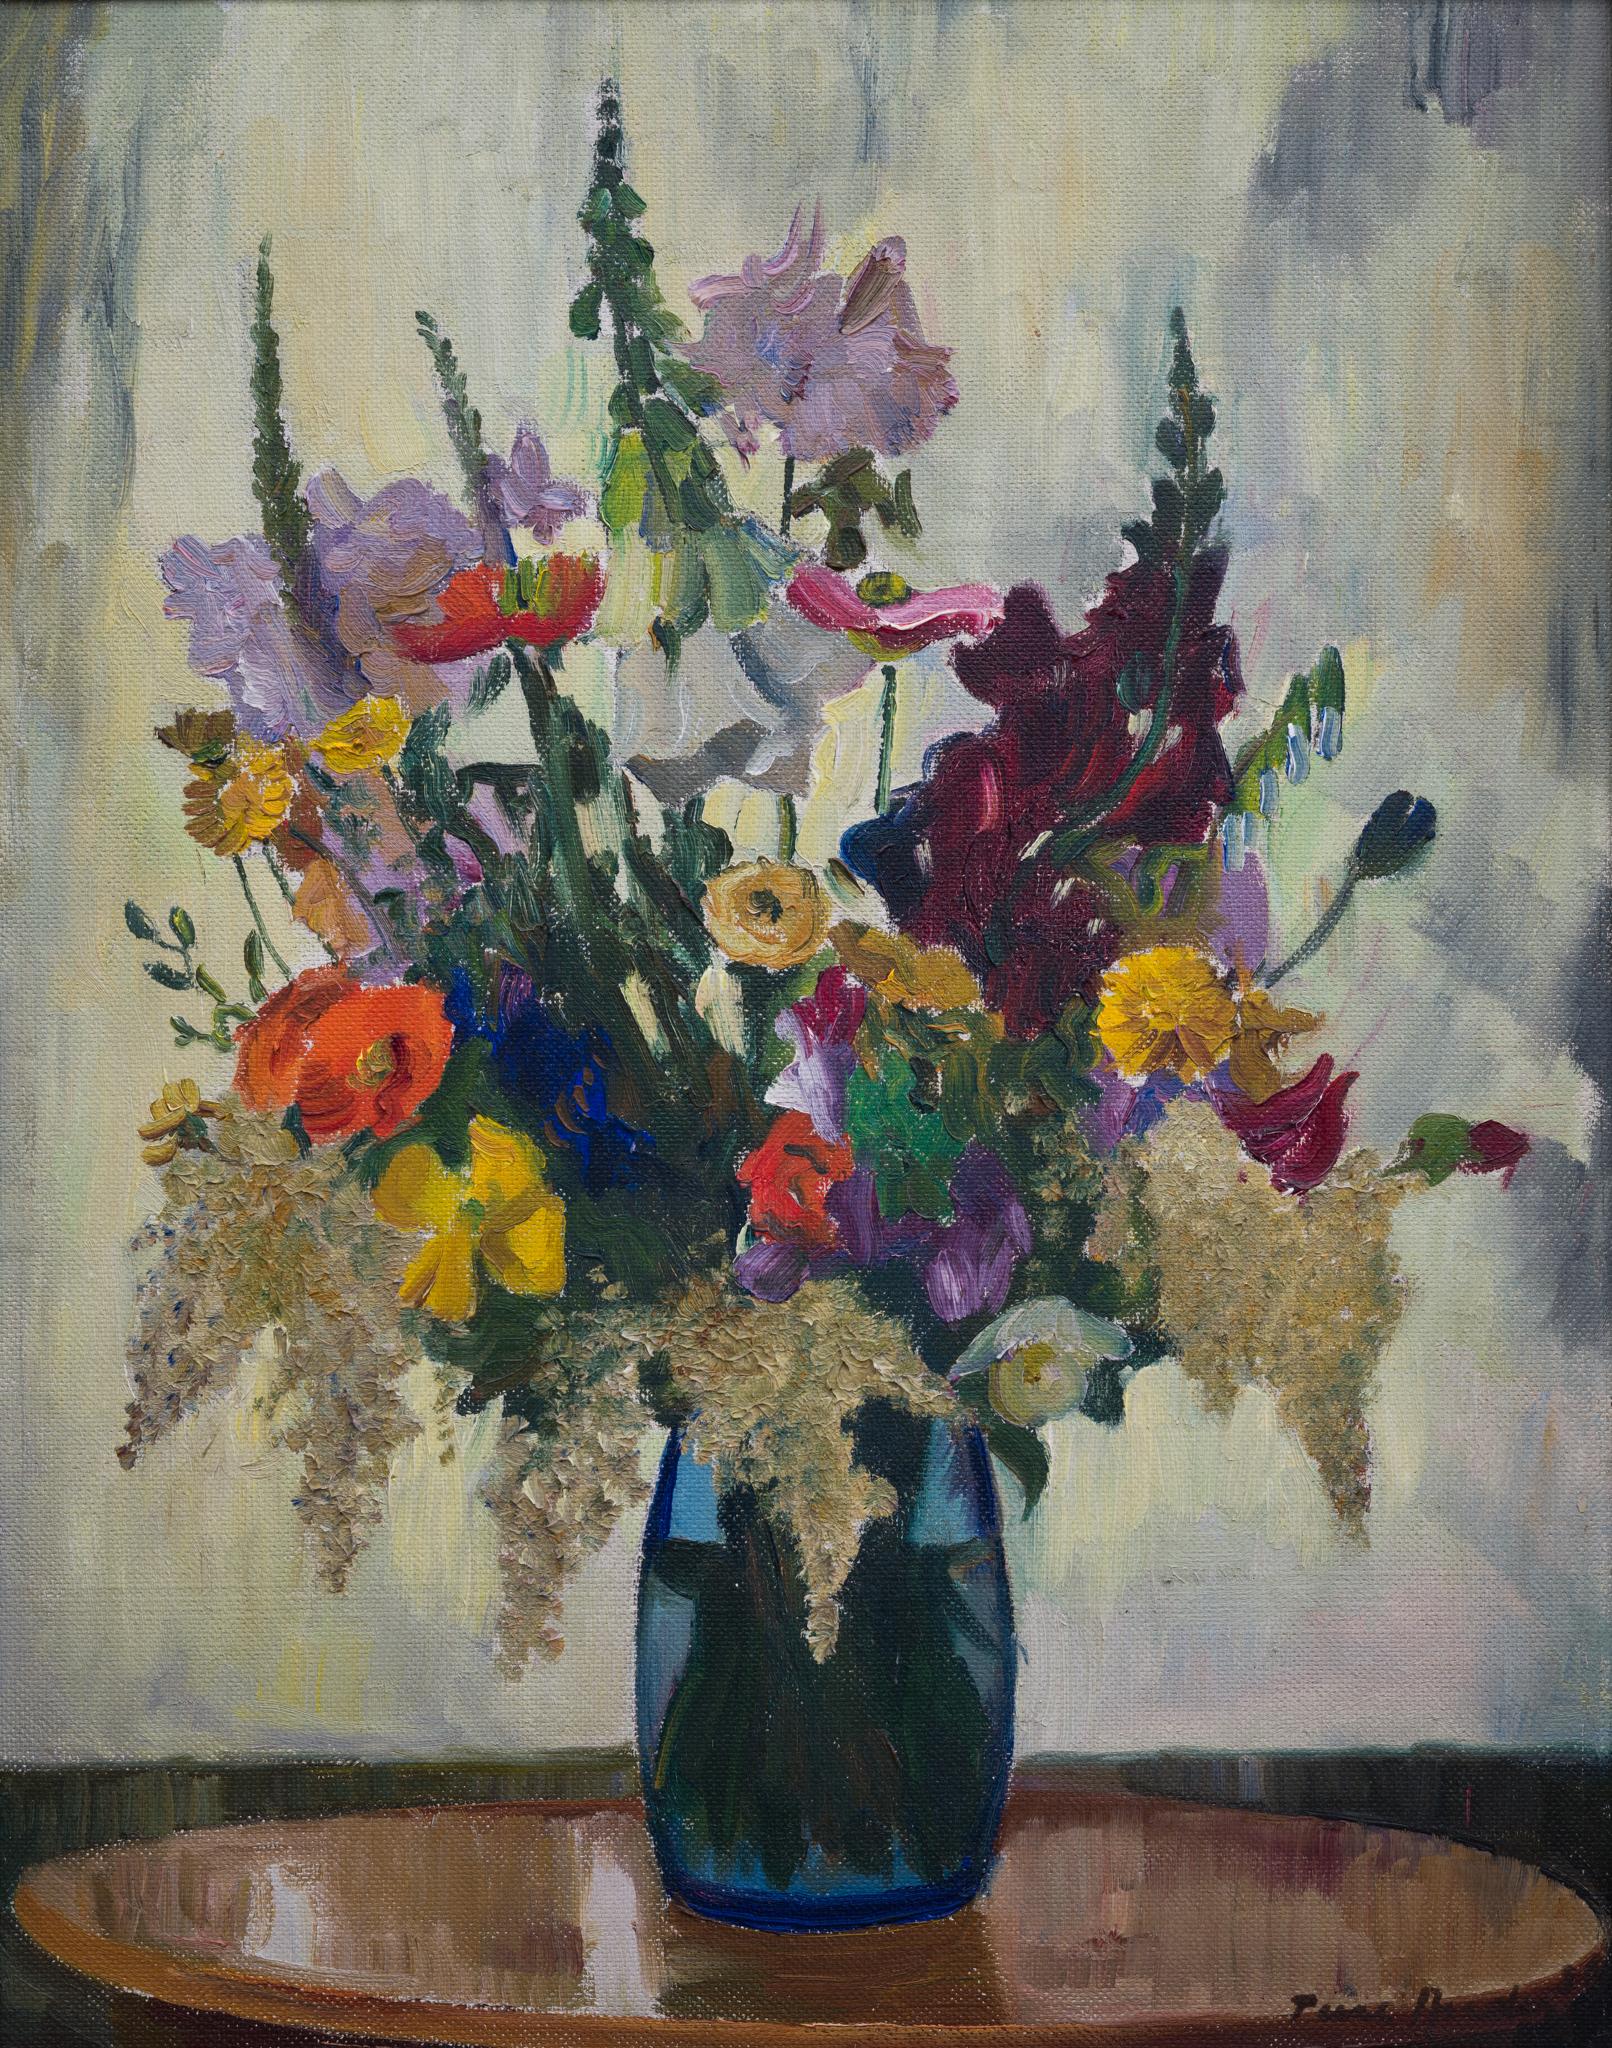 A Bouquet of Digitalis, Mohnblume, Iris, Snapdragons, Kornblume, Buttercup, 1936 – Painting von Ture Ander